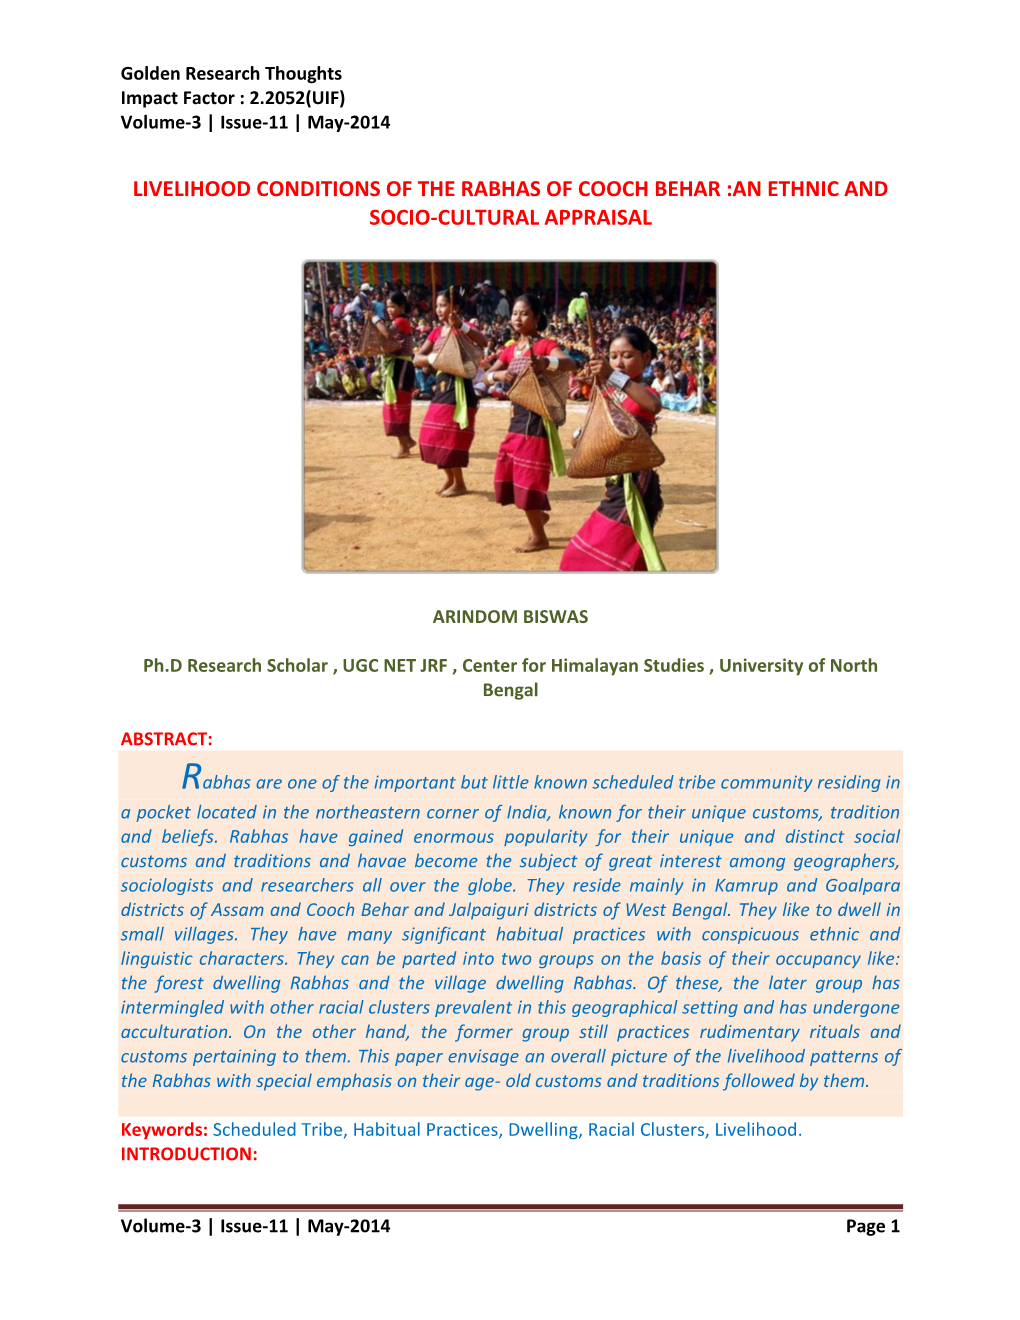 Livelihood Conditions of the Rabhas of Cooch Behar :An Ethnic and Socio-Cultural Appraisal